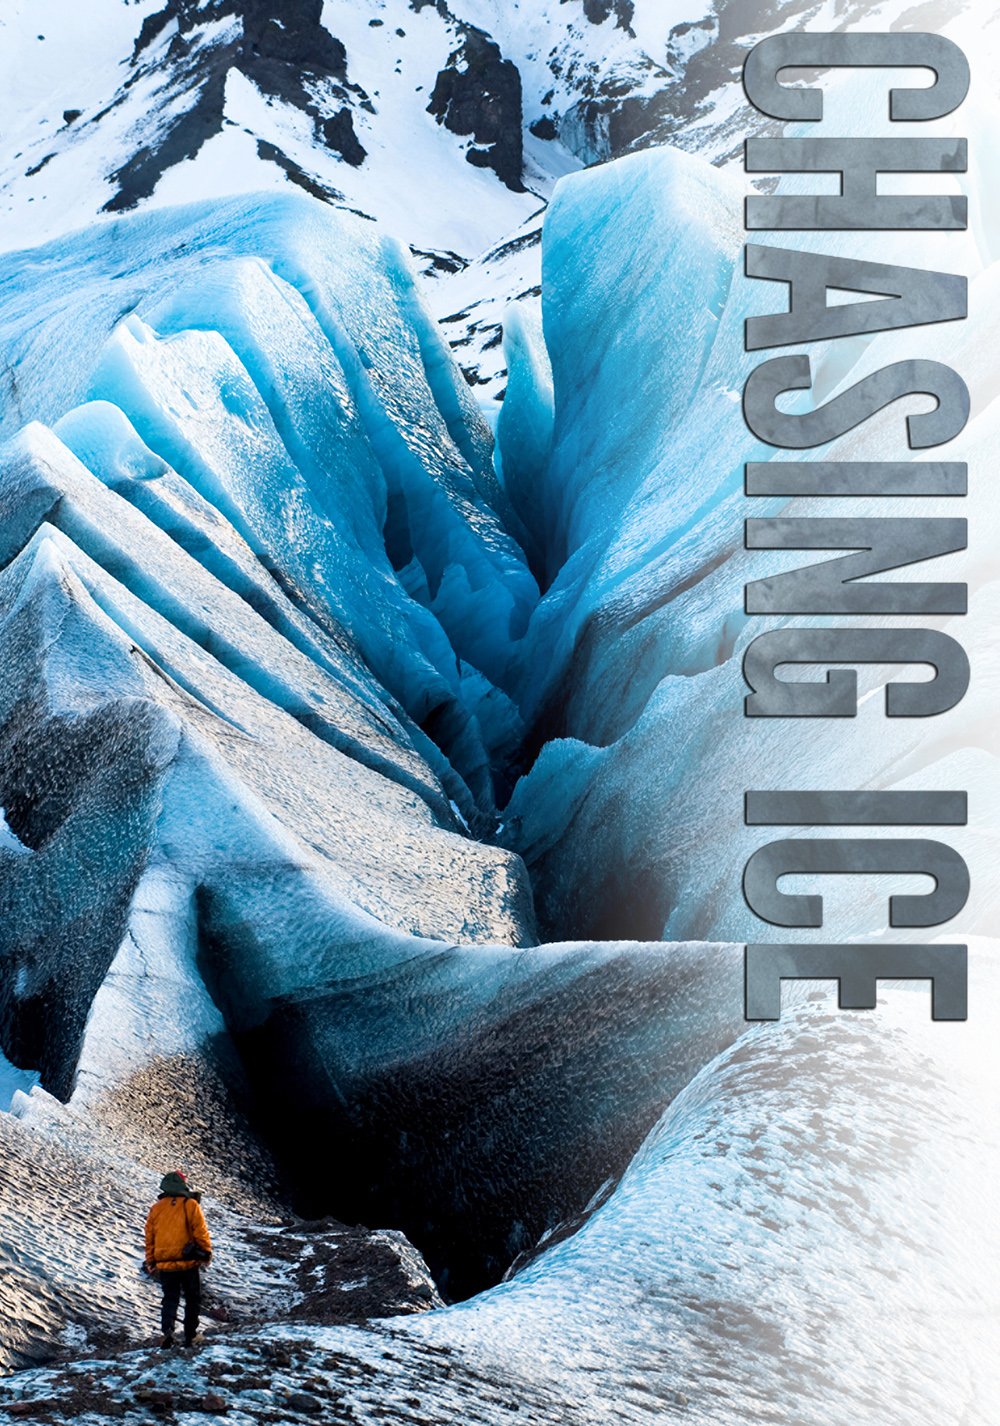 movie review chasing ice exercise